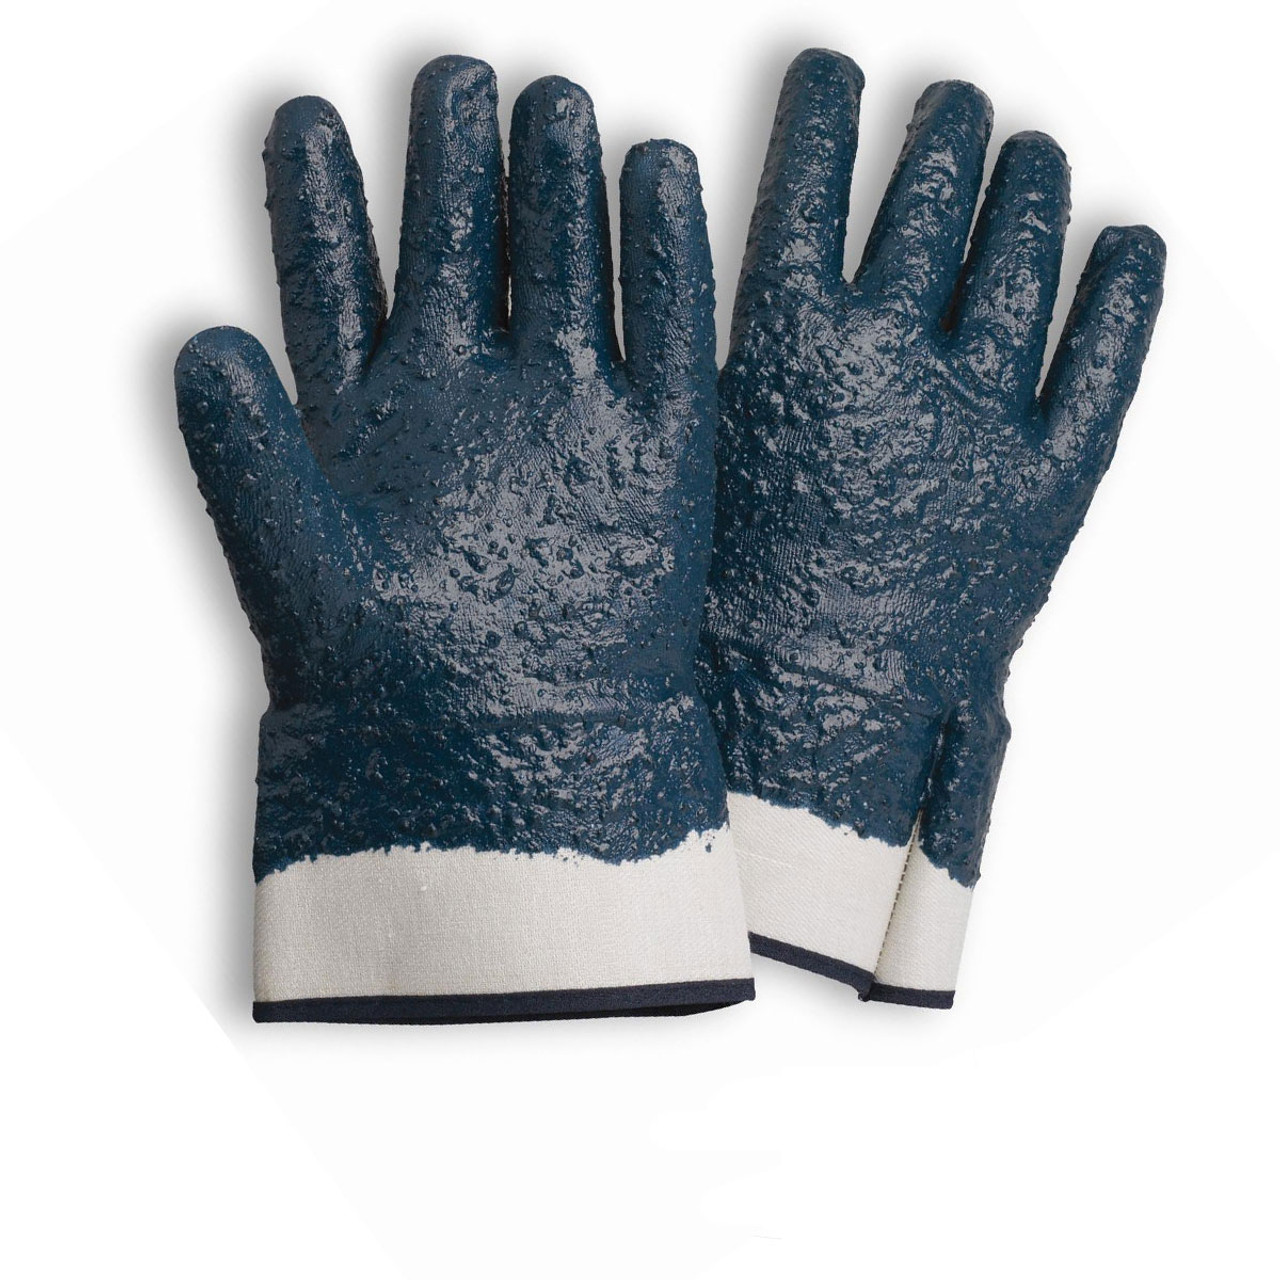 https://cdn11.bigcommerce.com/s-a5uwe4c7wz/images/stencil/1280x1280/products/774/1591/Nitrile-Coated-Gloves-Jersey-Lined-Rough-Finish__98692.1586185793.jpg?c=1